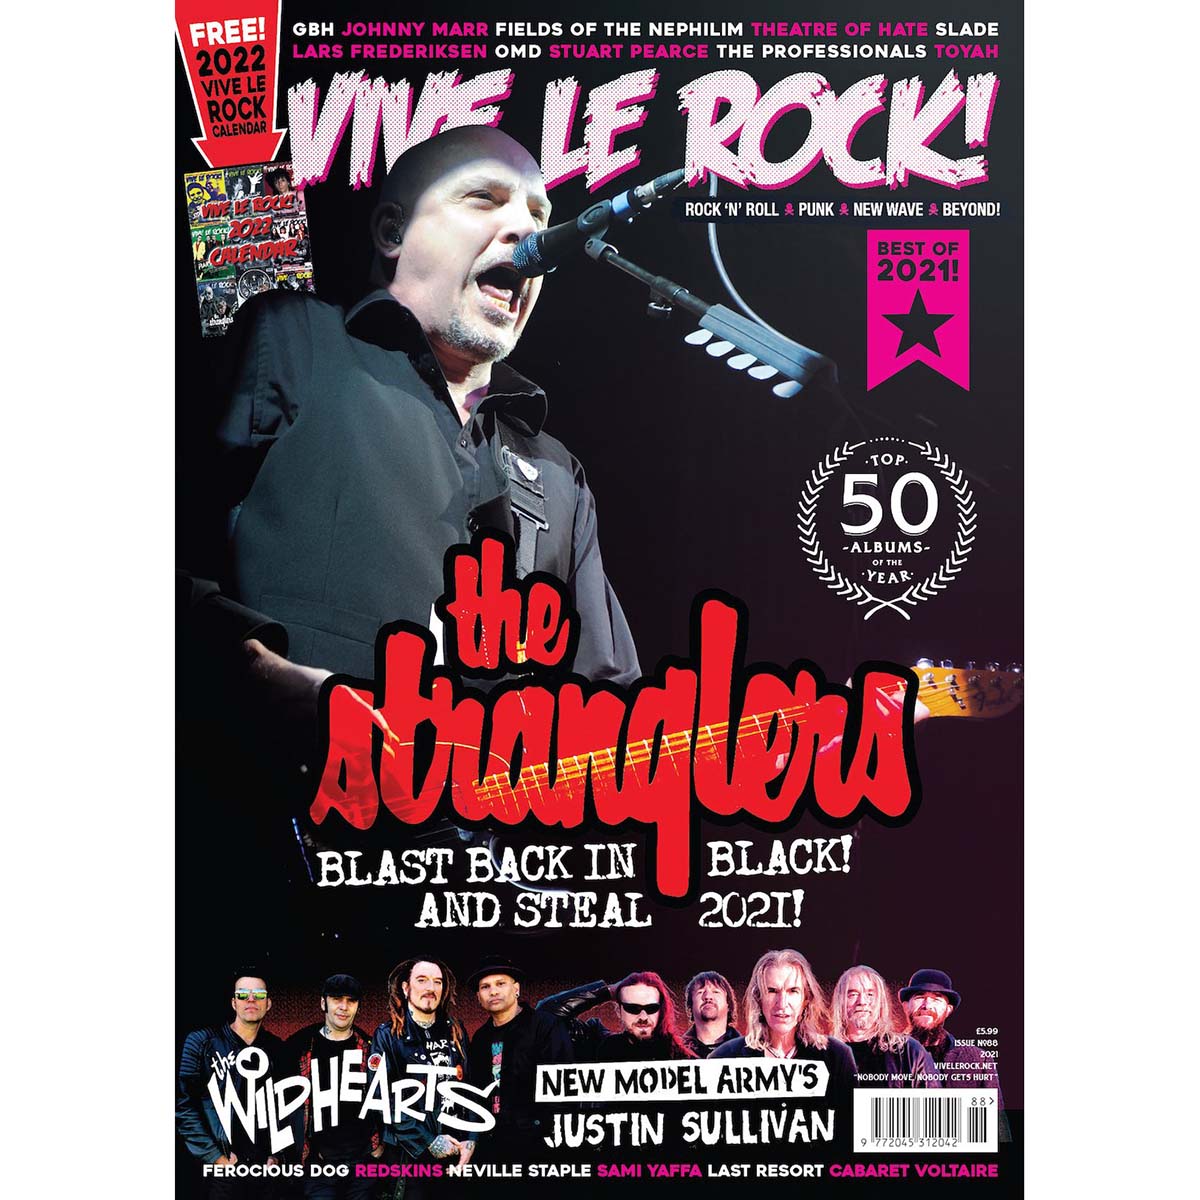 Vive Le Rock! Issue 88 (Best of 2021) The Stranglers